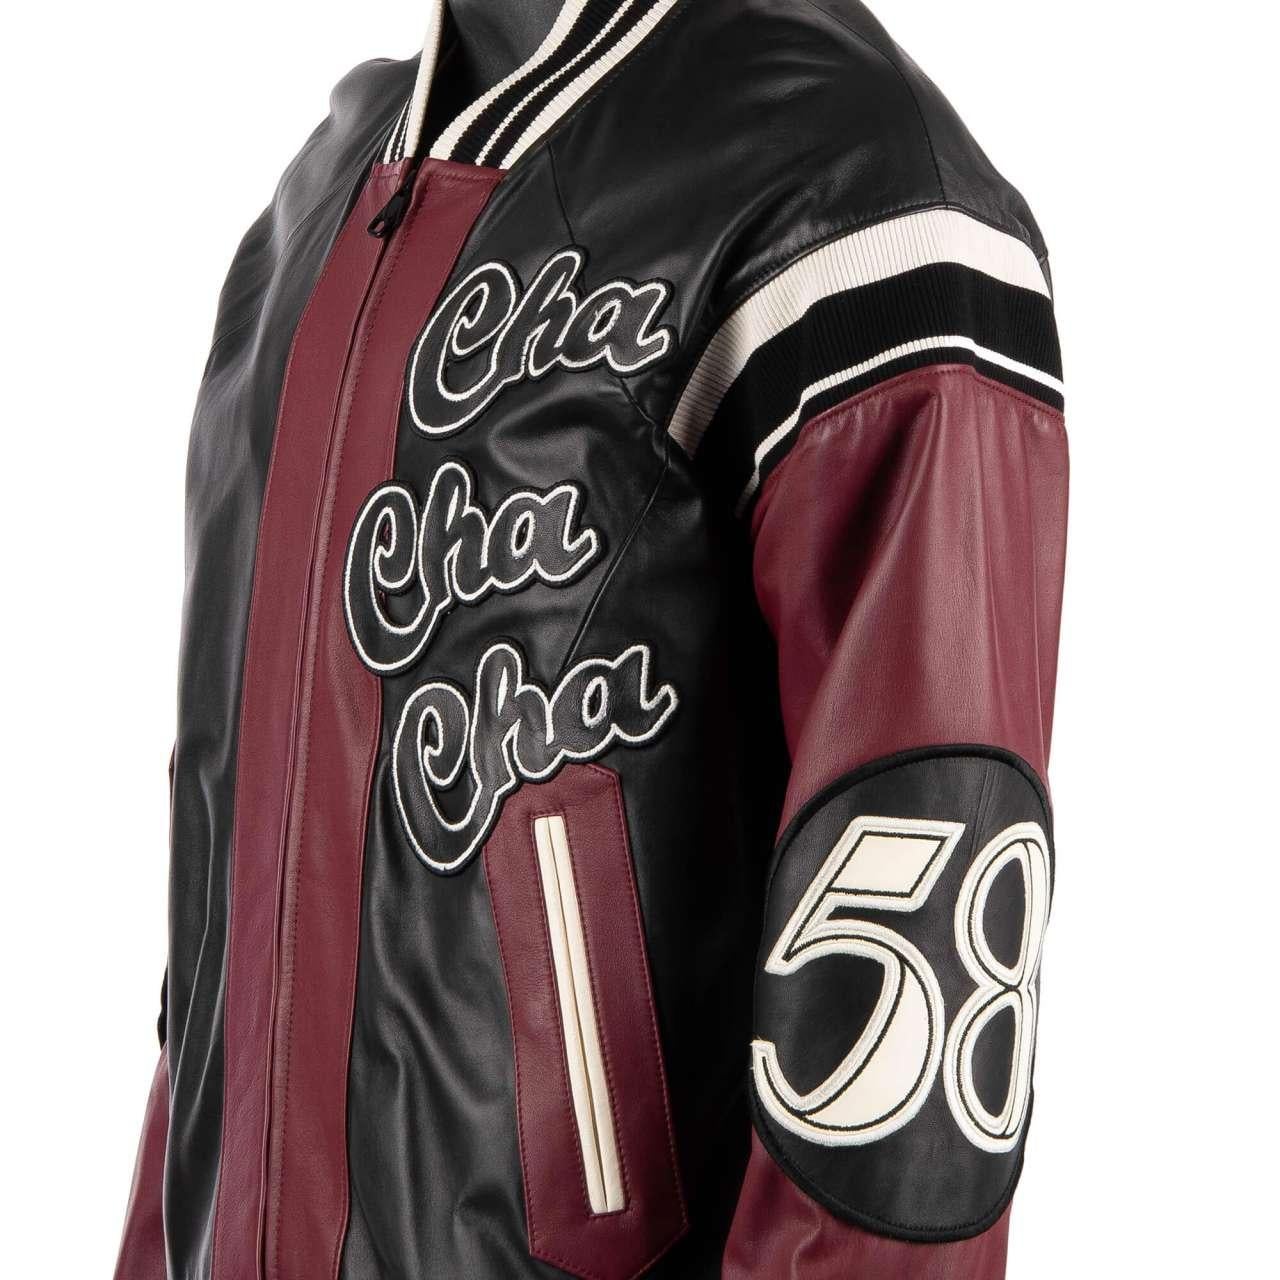 D&G Club Lounge Cello Embroidered Bomber Leather Jacket Black Bordeaux 44 For Sale 2